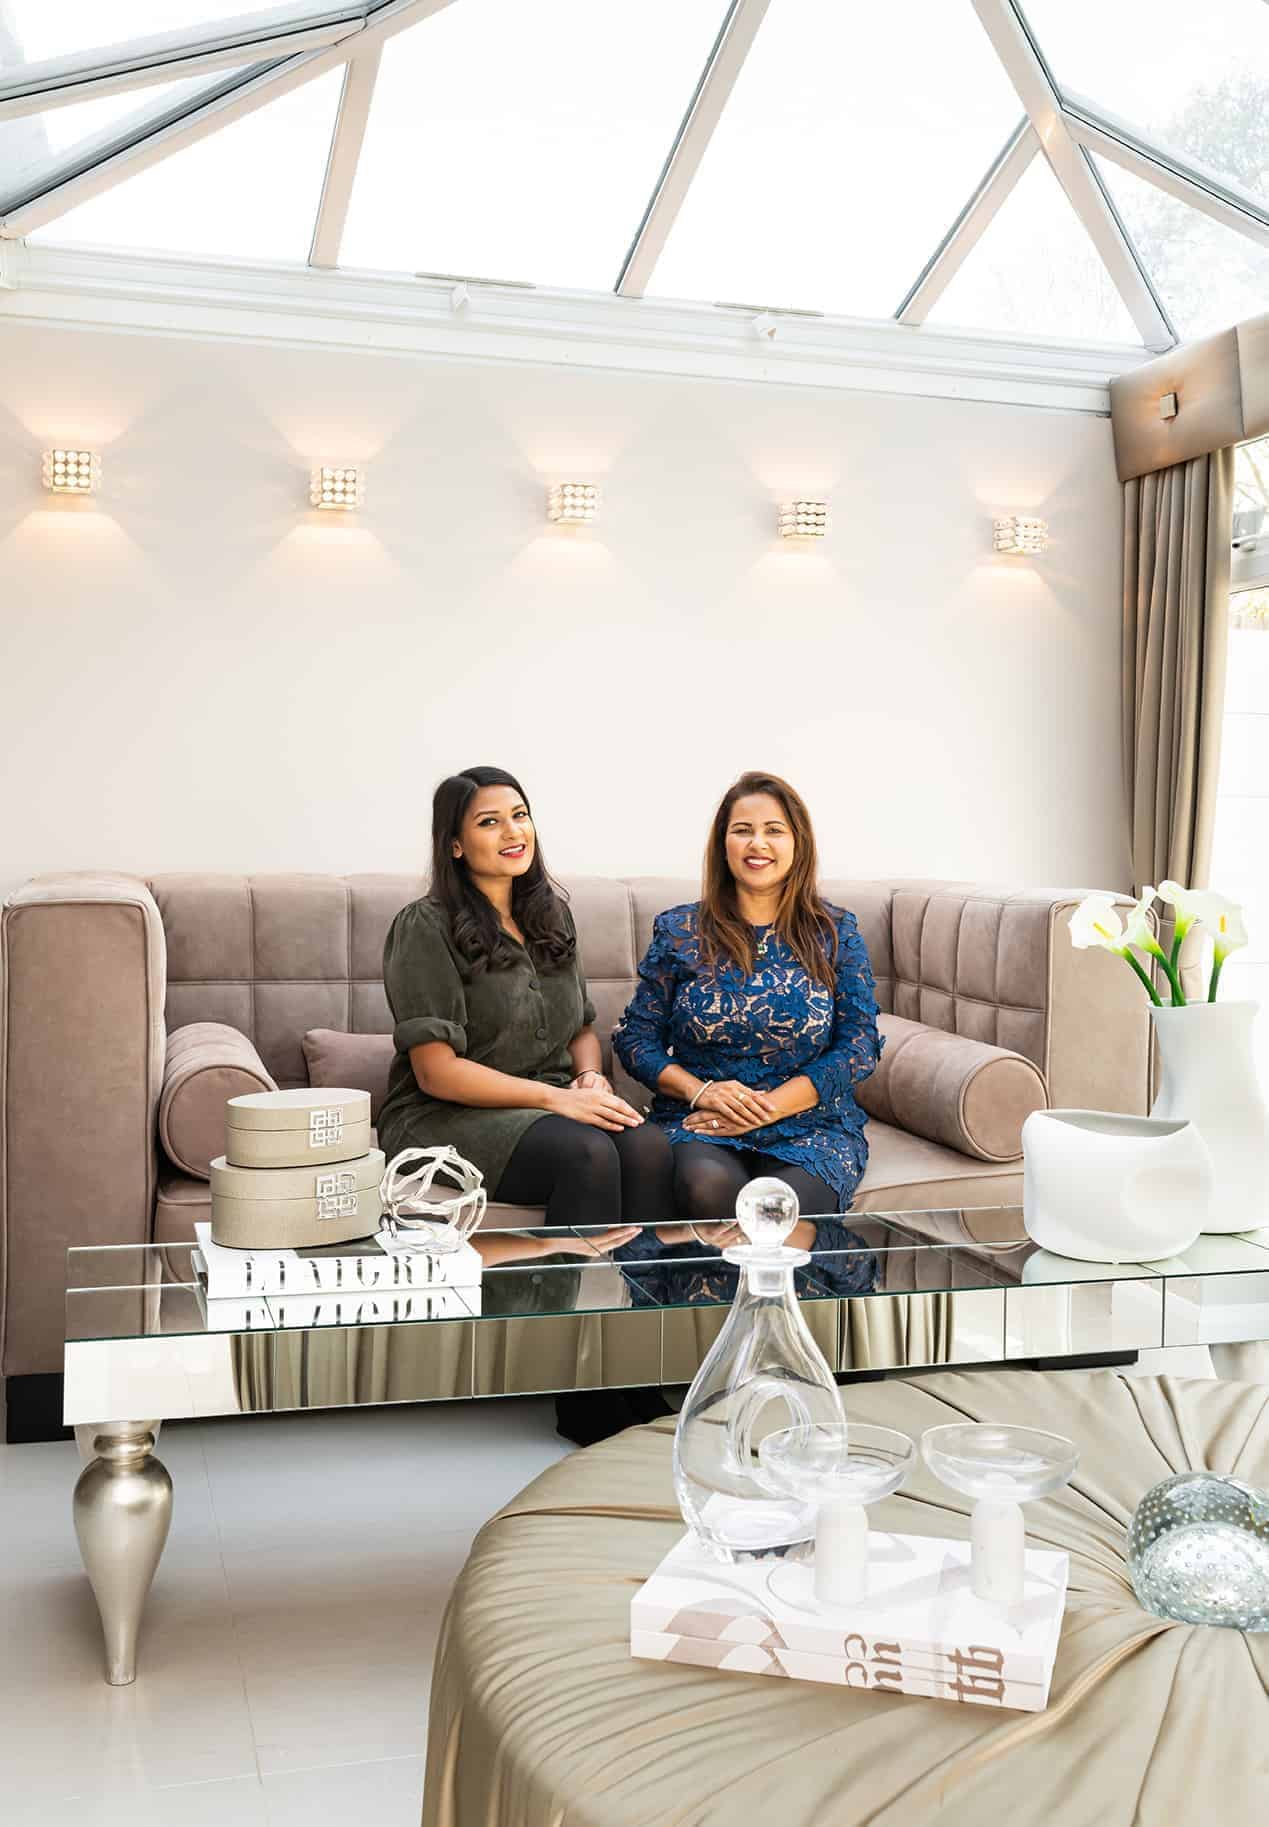 Our Interior Designers for Ealing, Megha and Vandana